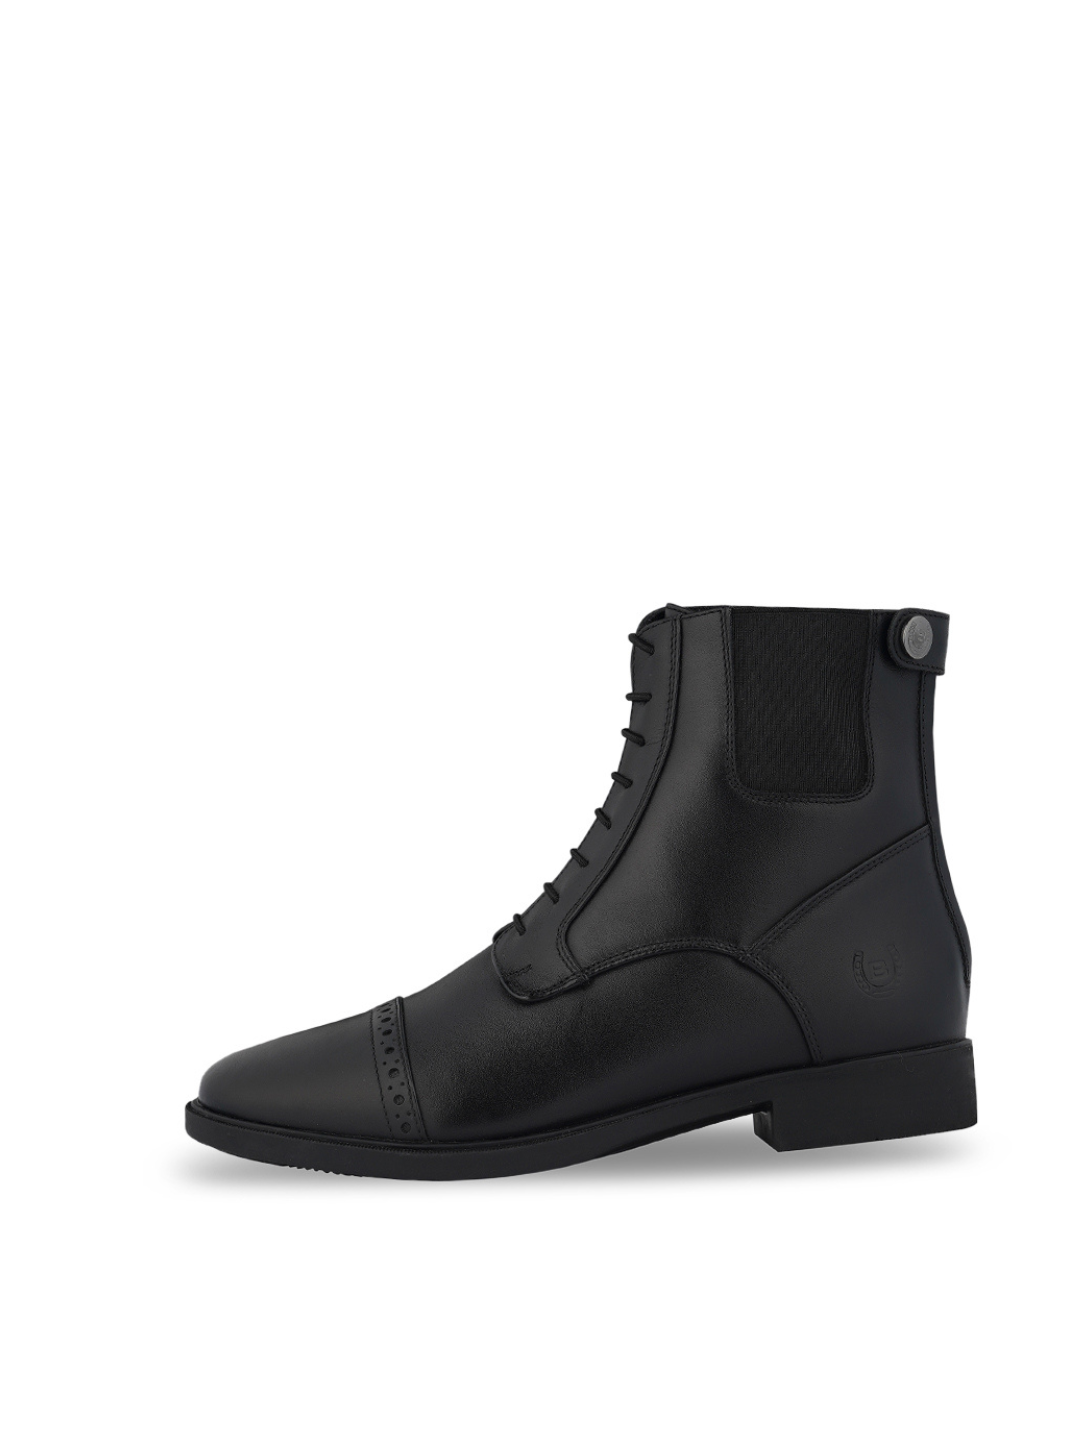 THOROUGH - Kids, Front lace ankle riding boots.